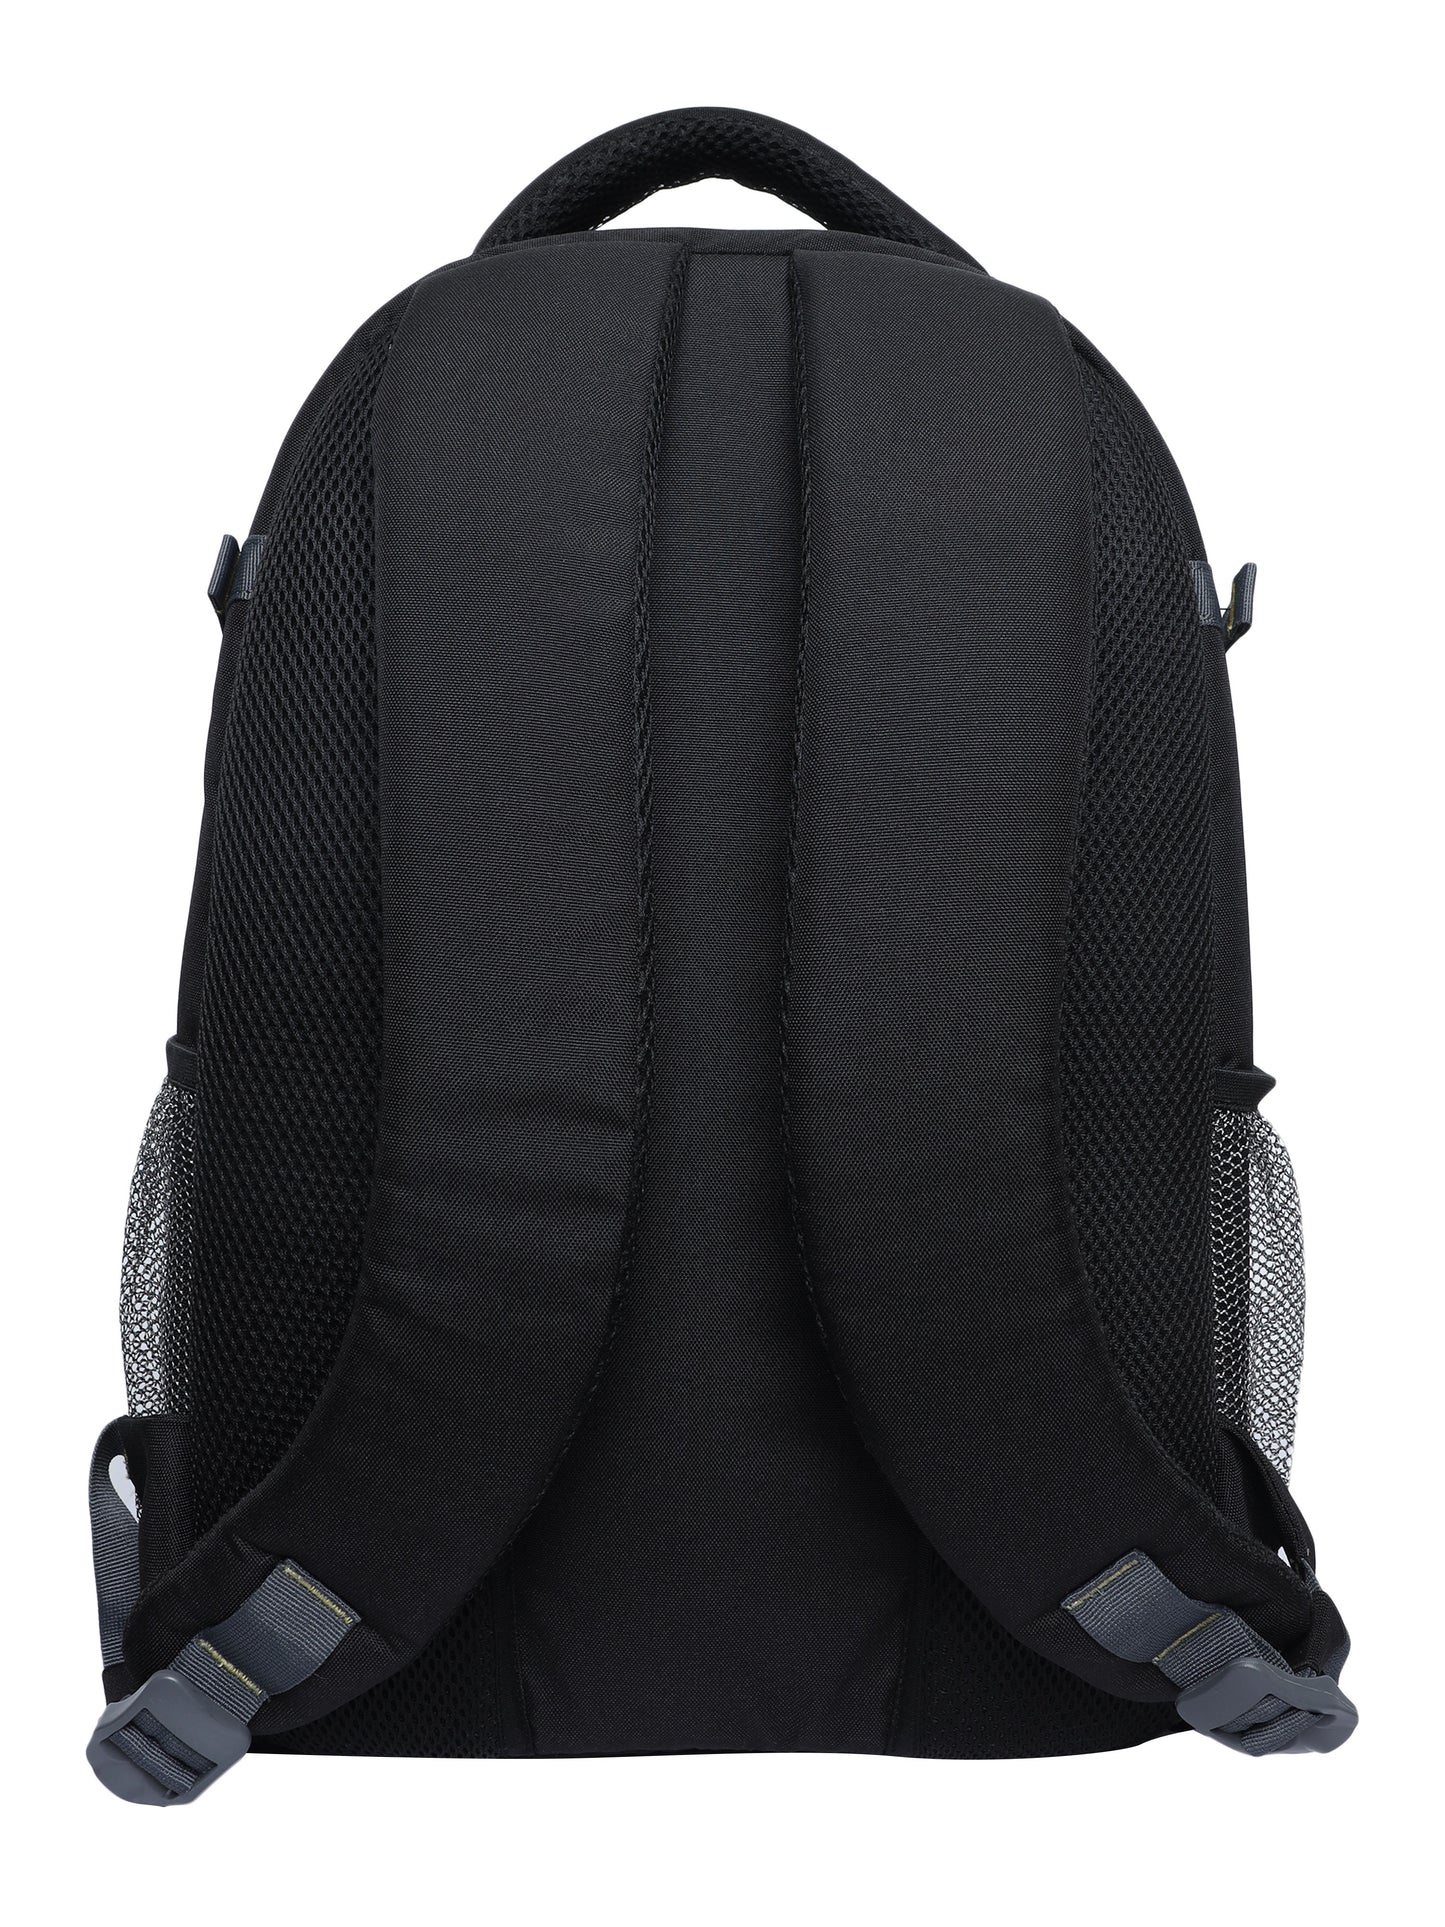 Back view of 'The Game Changer' camera bag from the Pinball Game series, highlighting its comfortable shoulder straps. The bag features padded and adjustable straps that provide excellent support and distribute the weight evenly, ensuring a comfortable carrying experience. The ergonomic design of the straps allows for extended use without strain or discomfort, making it an ideal companion for photographers during long shooting sessions or on-the-go adventures.